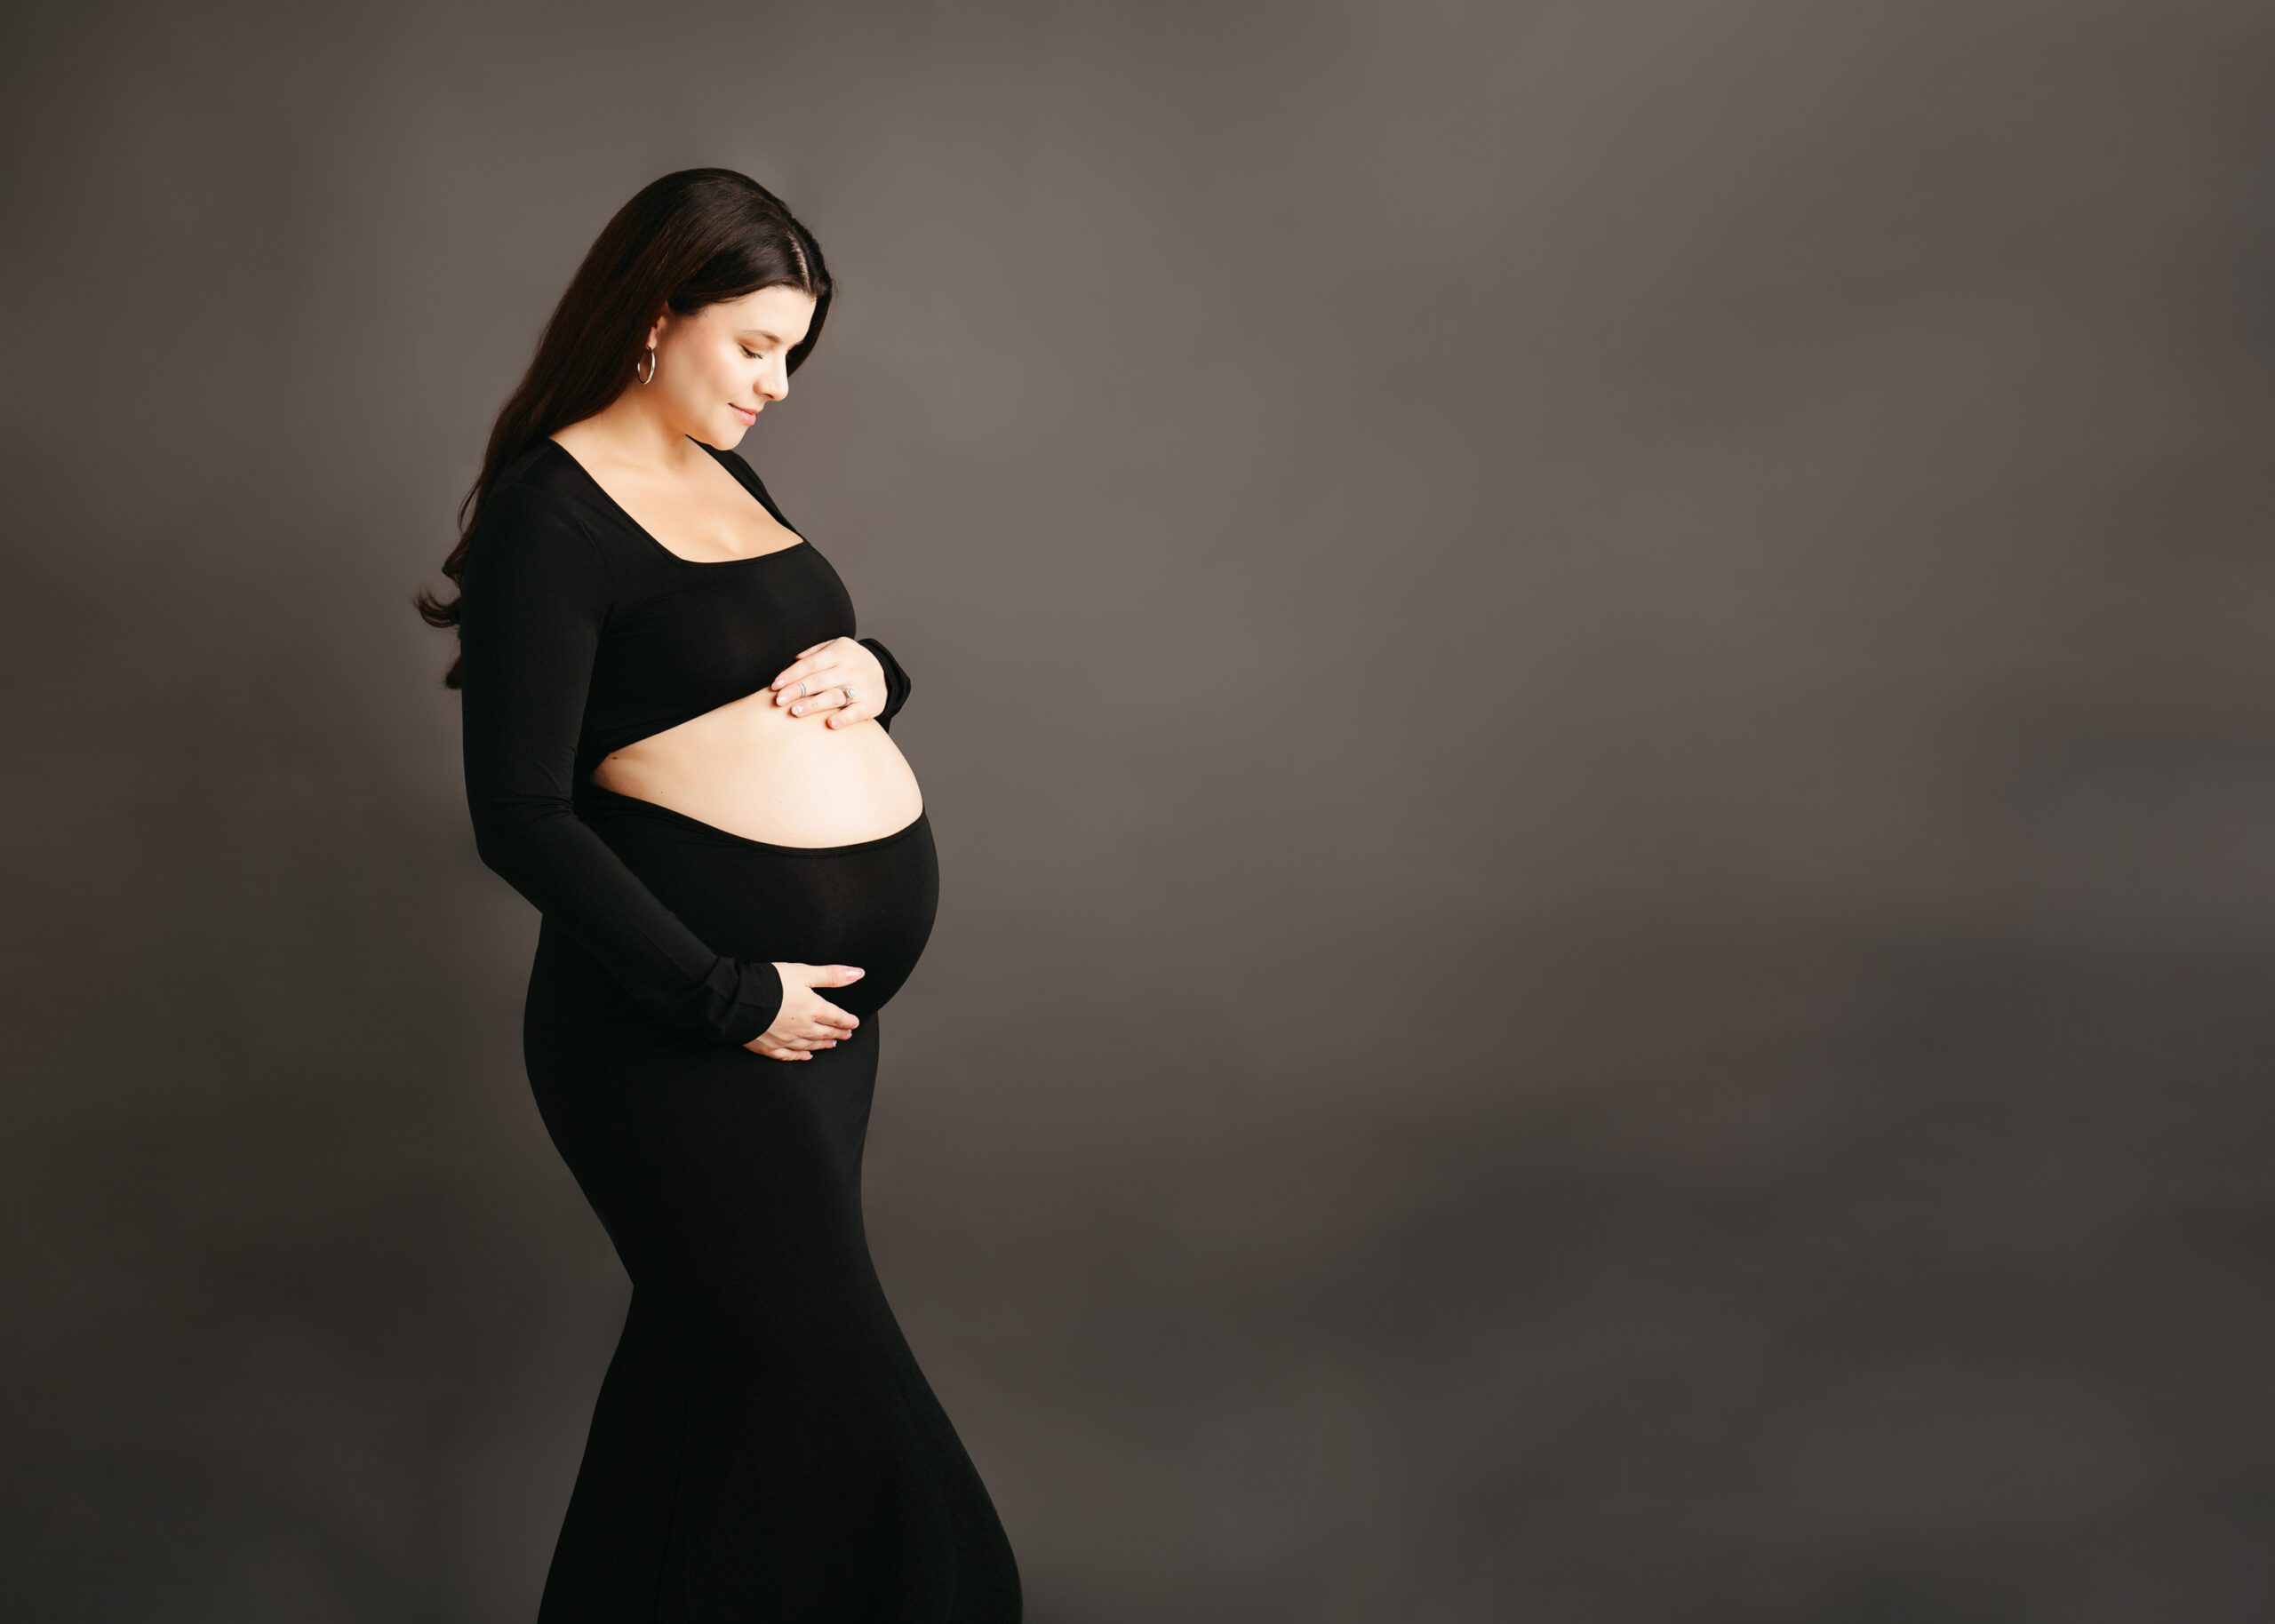 Studio portrait of an expectant mother wearing an elegant gown, showcasing her pregnancy glow